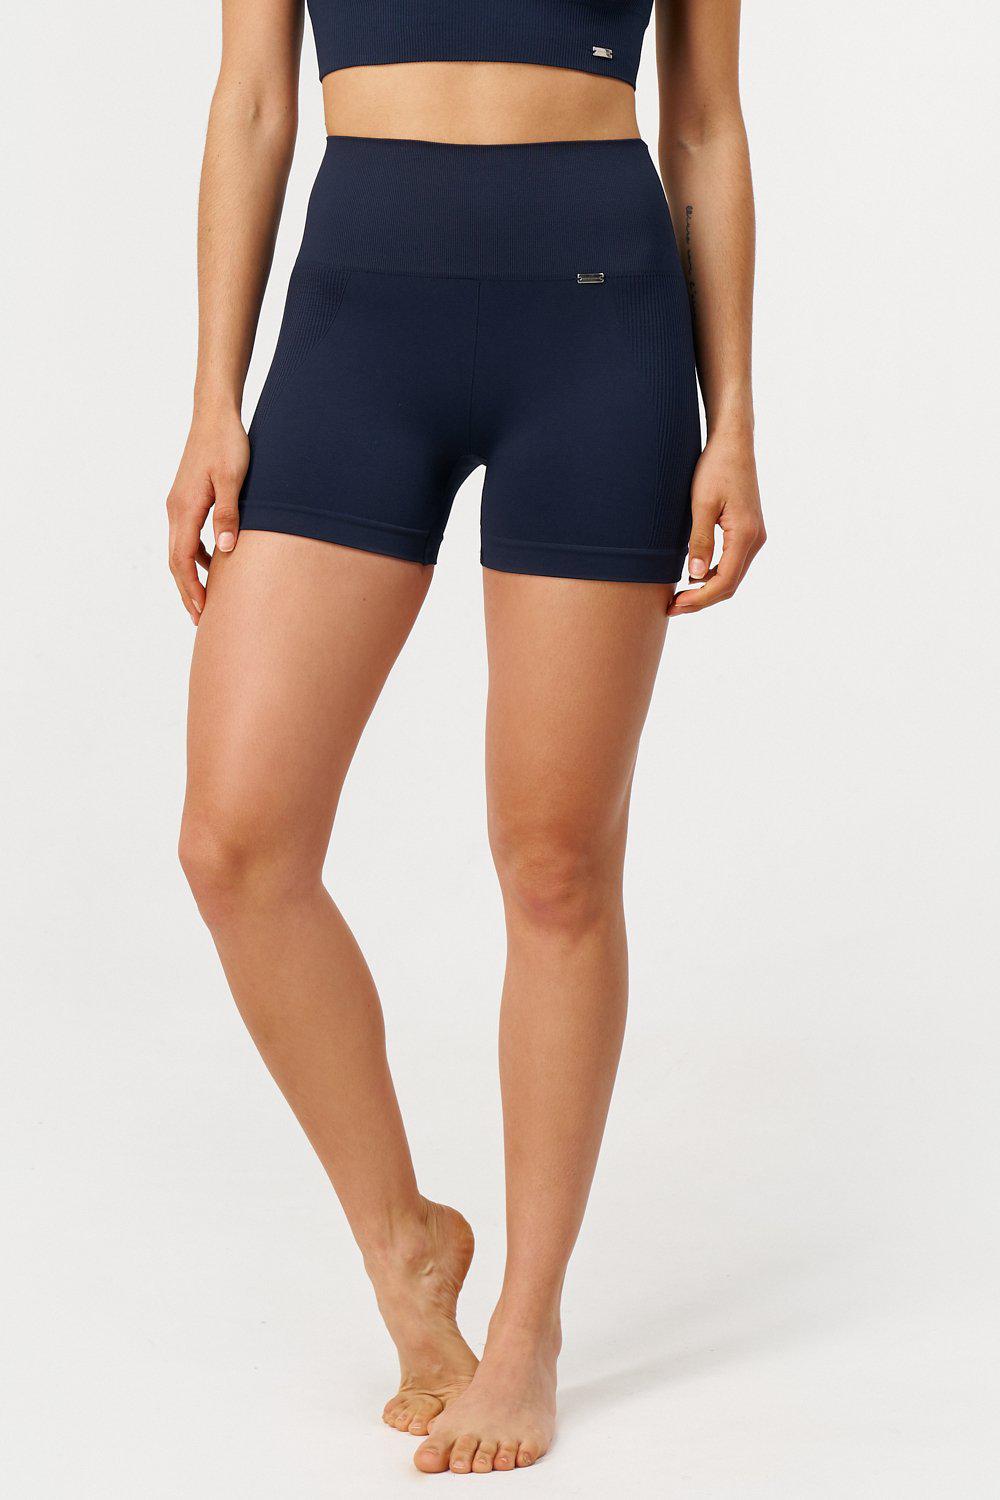 Bliss Short Push-Up in Navy-Shorts-Shop Sustainable Recycled Yoga Leggings Women's Clothing On-line Barcelona Believe Athletics Sustainable Recycled Yoga Clothes